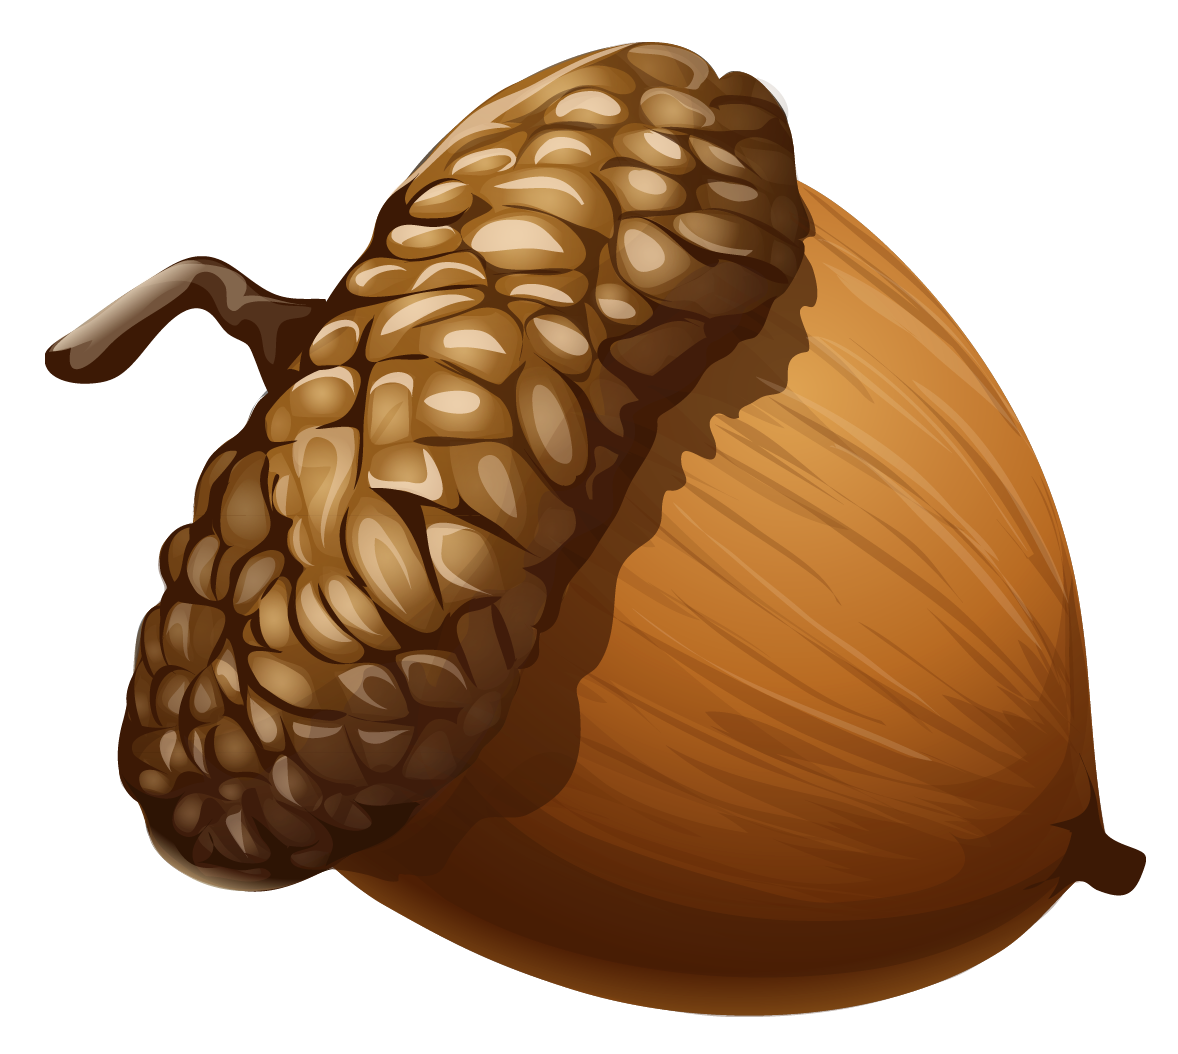 Png picture gallery yopriceville. Acorn clipart